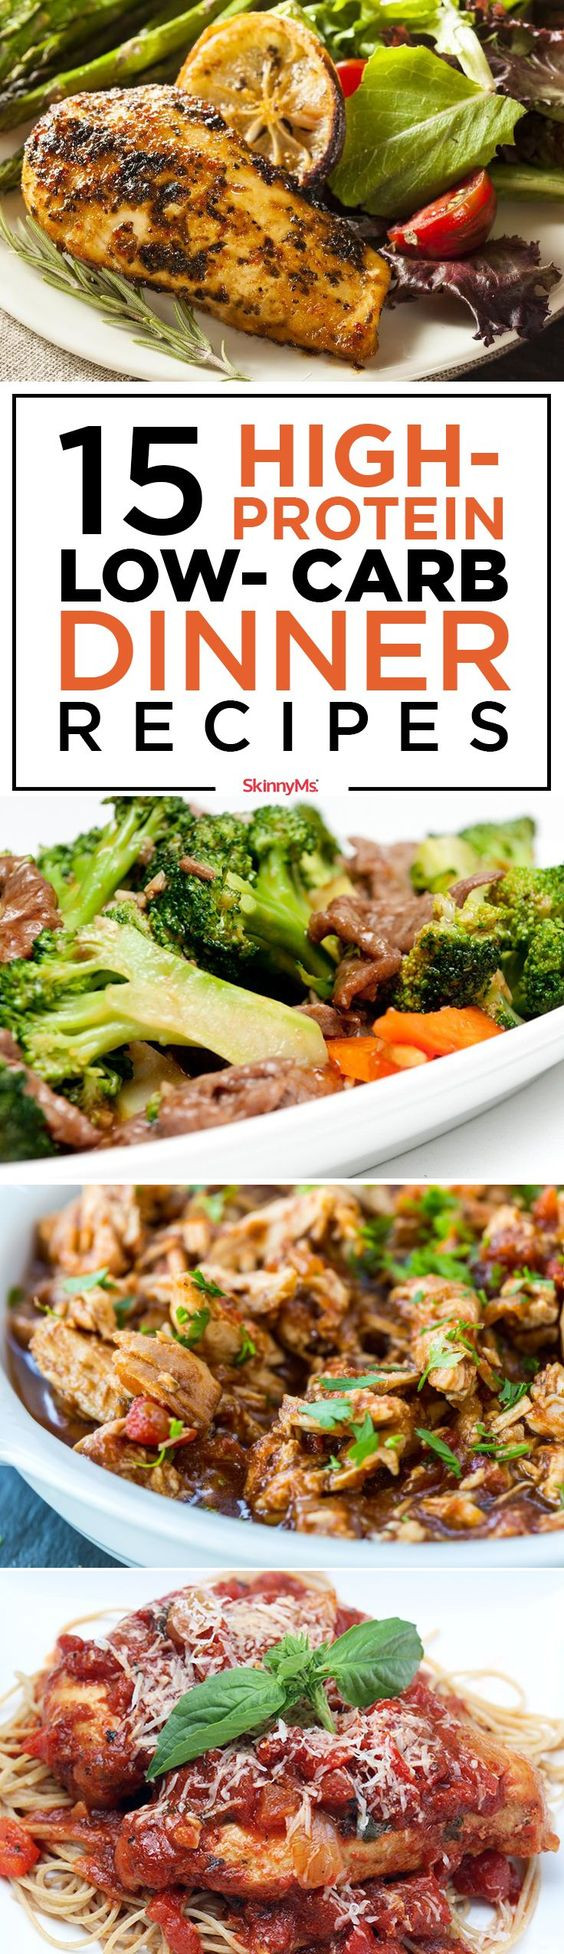 High Protein Low Carb Recipes
 Low carb dinner recipes High protein low carb and Dinner